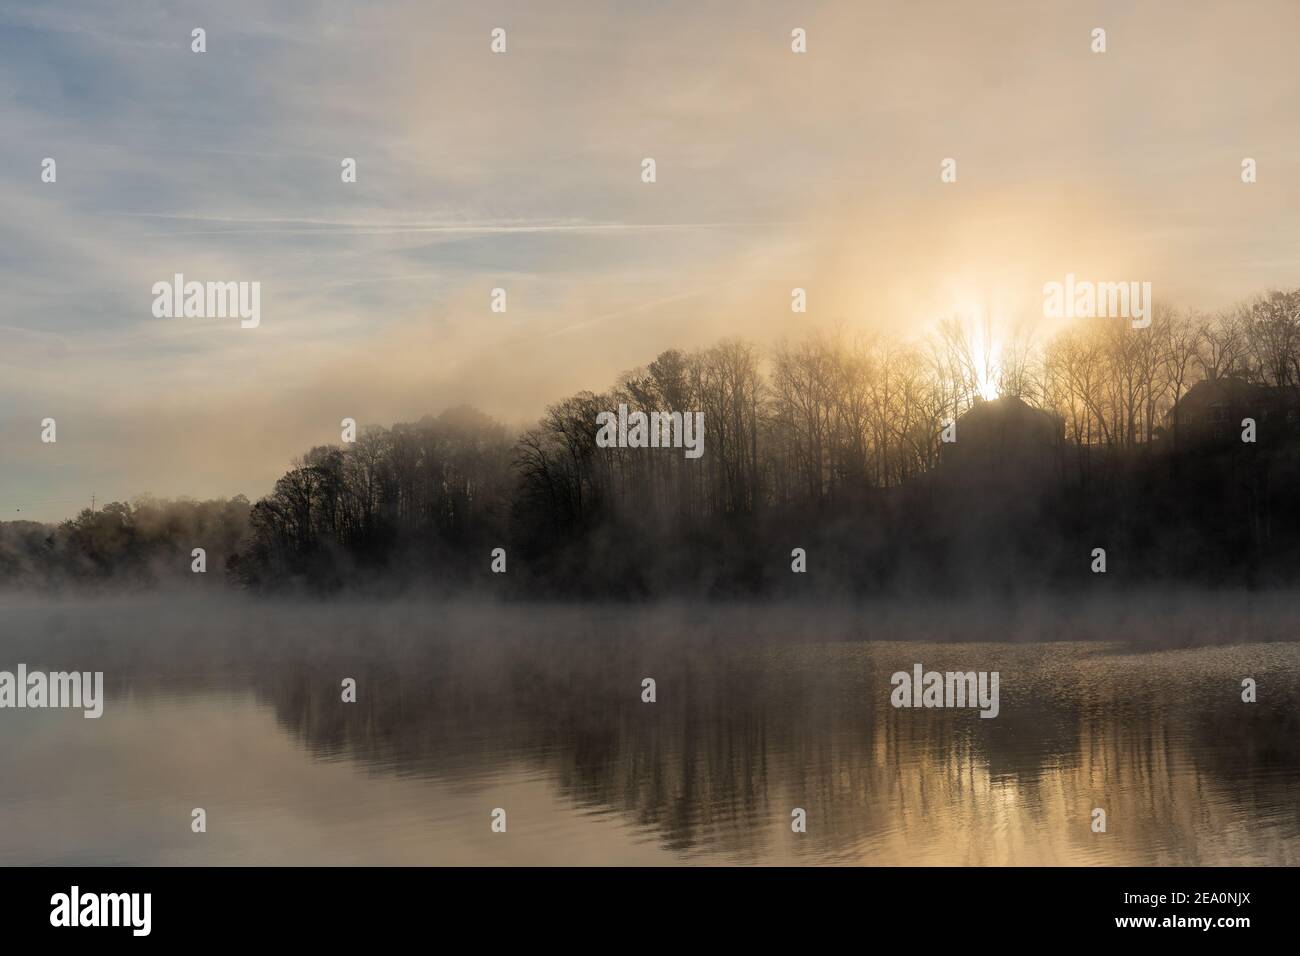 The sun rises behind a house on Lake Lanier in Georgia with fog rising on the surface of the water under a blue and orange sky; landscape view Stock Photo